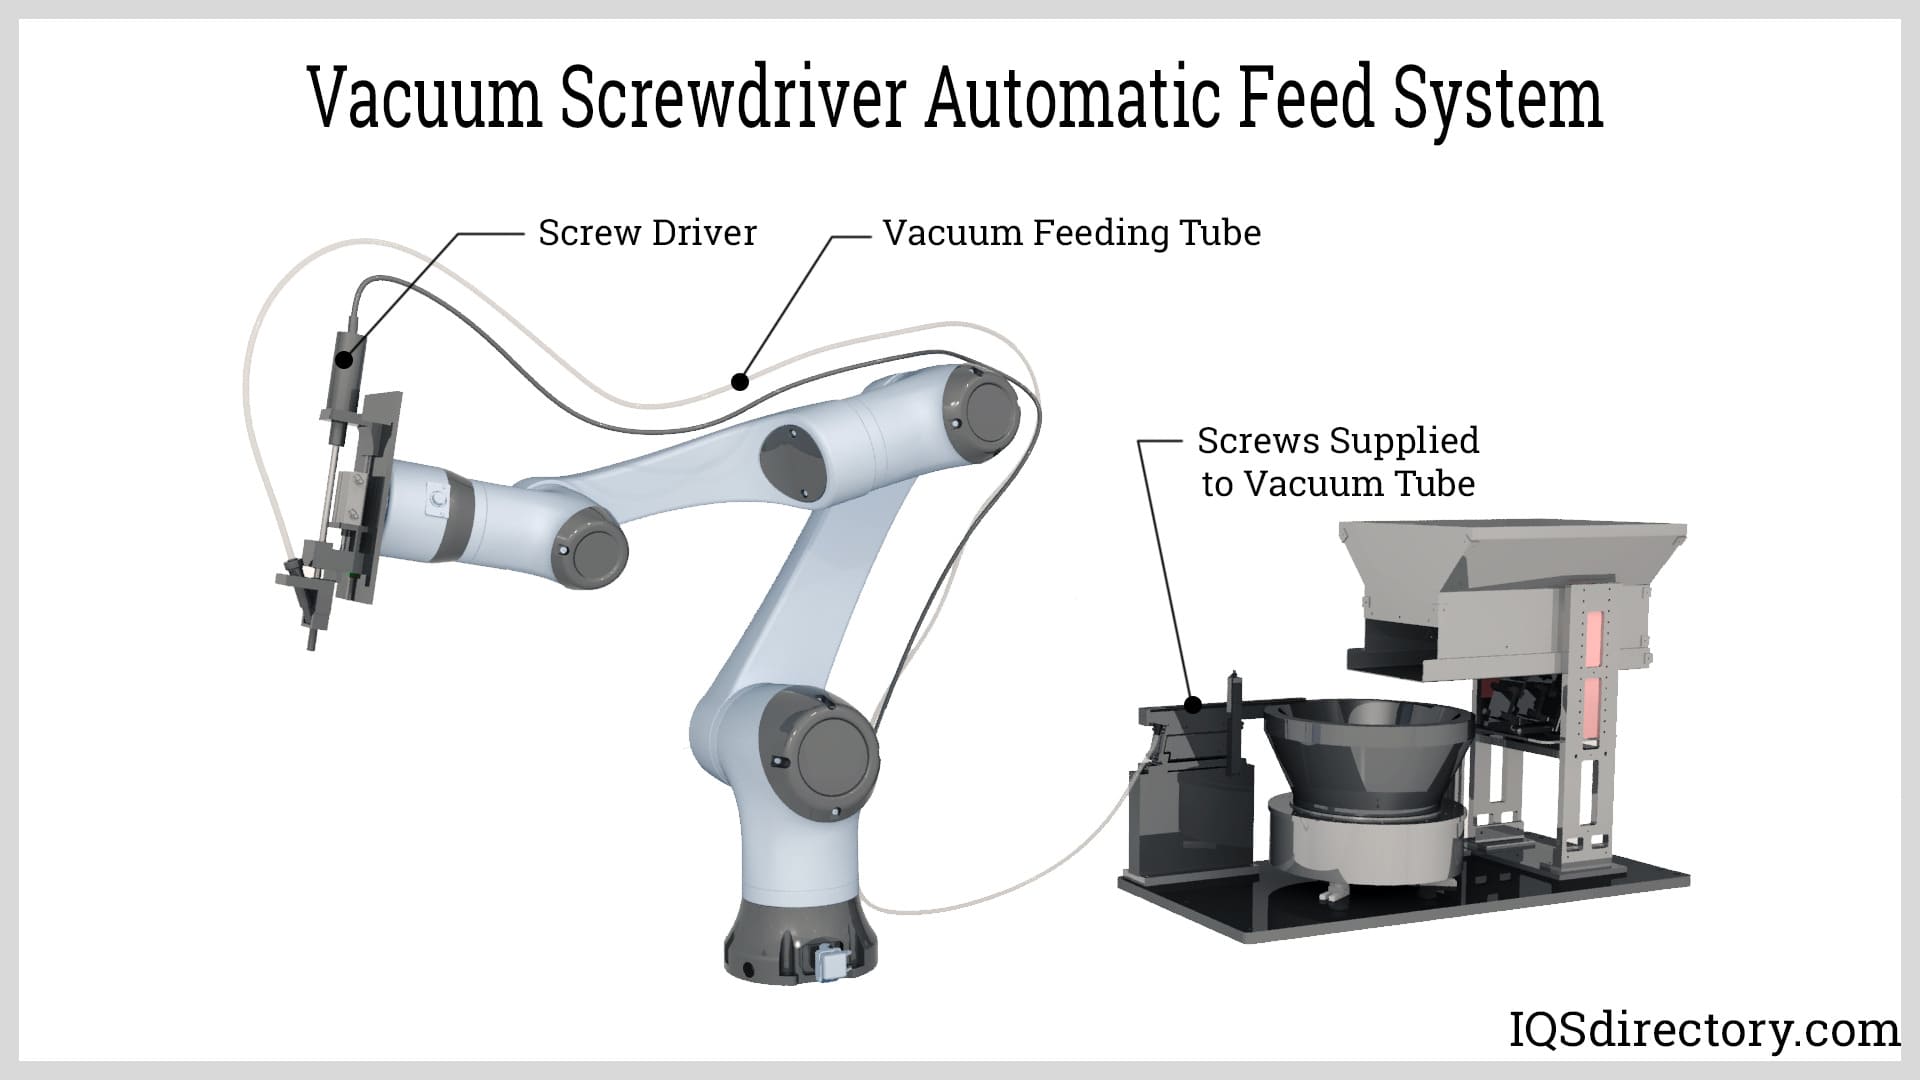 Vacuum Screwdriver Automatic Feed System